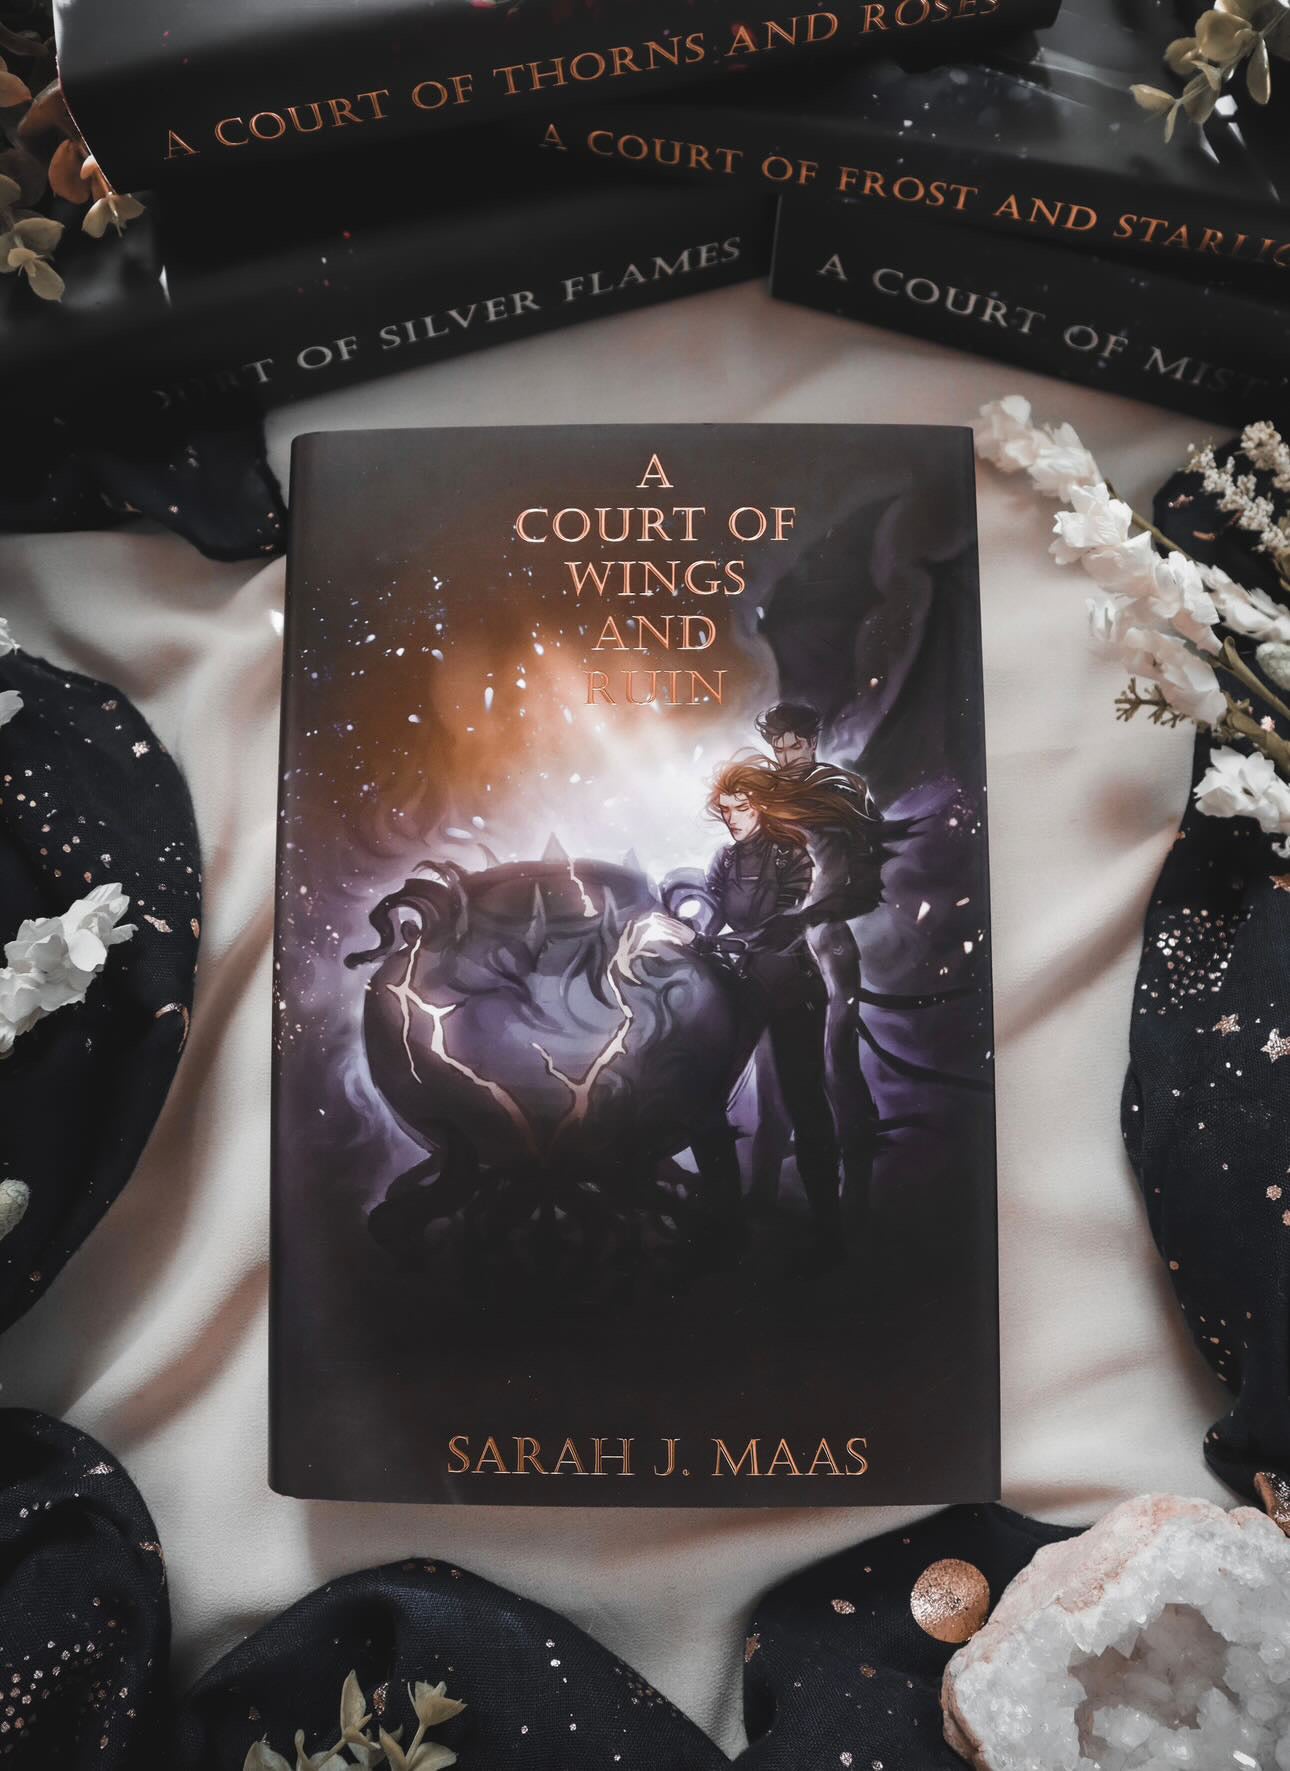 A Court of Thorns and Roses Dust Jacket Set